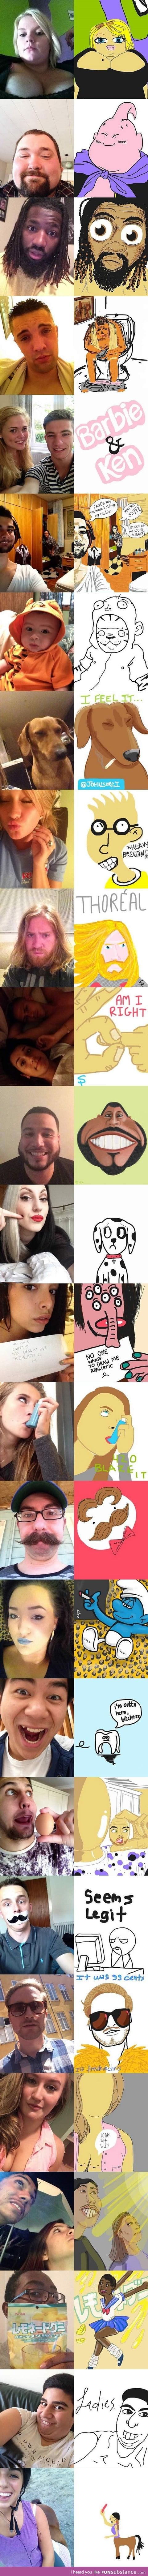 People posted selfies and others drew them